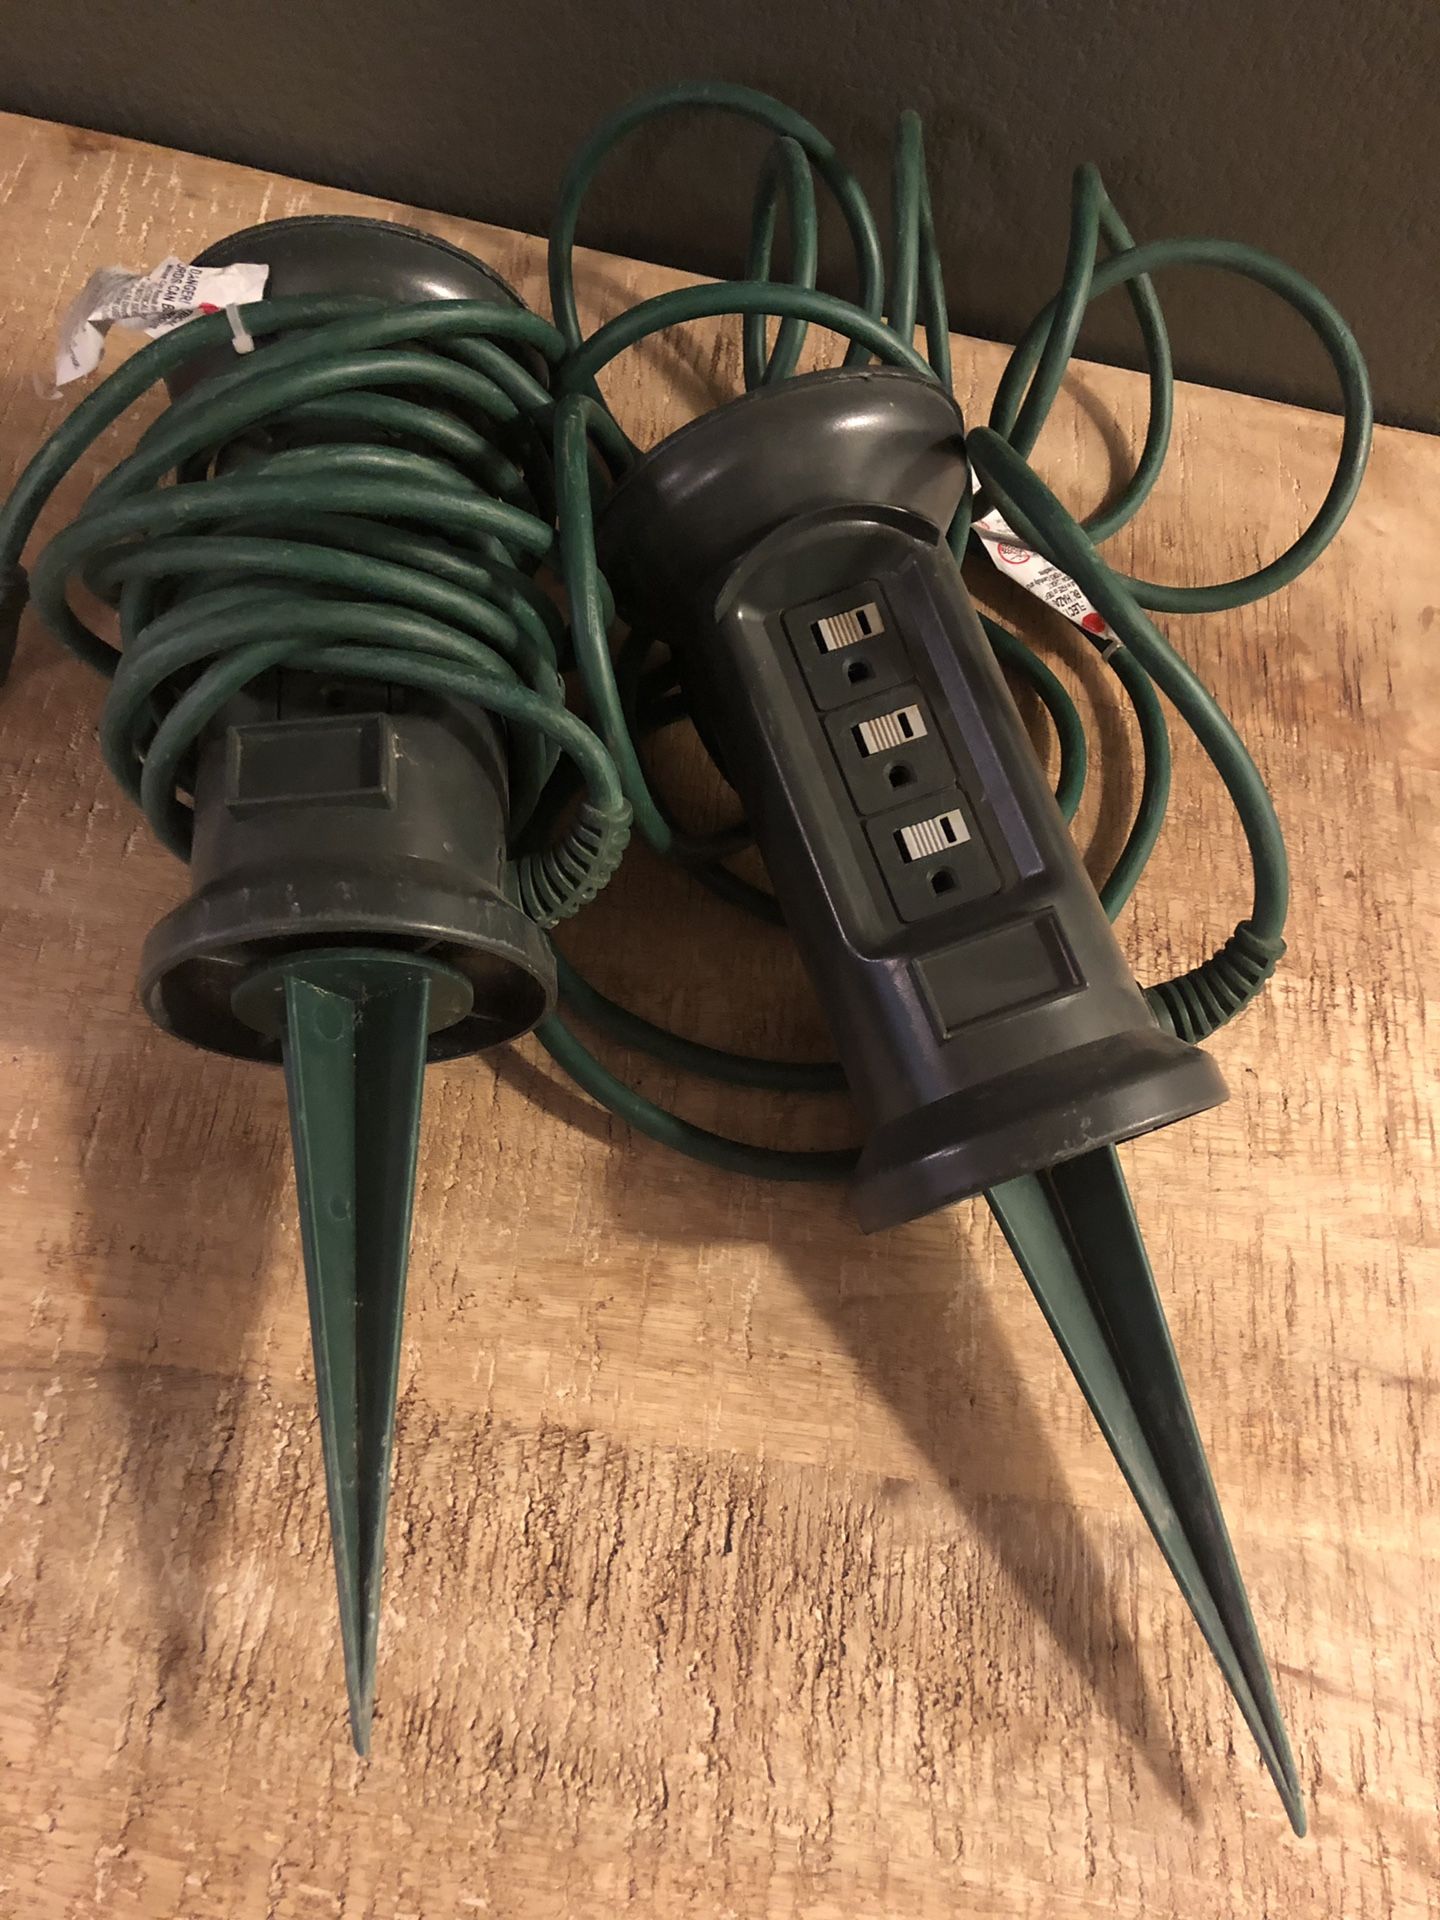 2 yard extension cords